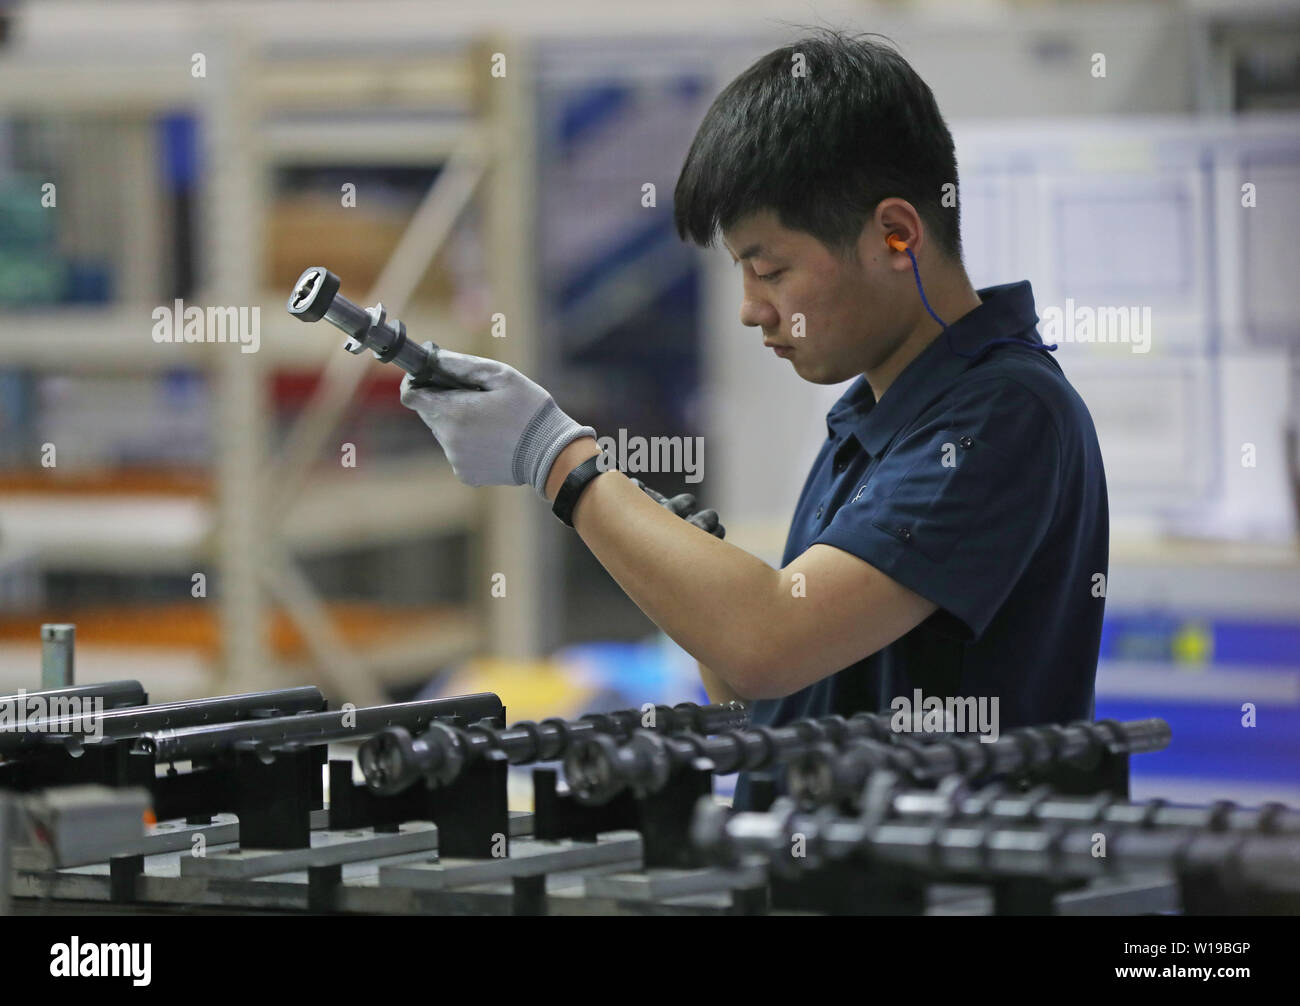 (190701) -- DALIAN, July 1, 2019 (Xinhua) -- A man works at ThyssenKrupp Presta Dalian Co., Ltd. in Dalian, northeast China's Liaoning Province, March 20, 2019. The 2019 Summer Davos Forum is held from July 1-3 in northeast China's coastal city of Dalian. Established by the World Economic Forum in 2007, the forum is held annually in China, alternating between the two port cities of Dalian and Tianjin. Summer Davos has been reshaping the landscape of Dalian's regional economy and strengthening the port's trade with other markets. Dalian has become an international city and a showpiece of China' Stock Photo